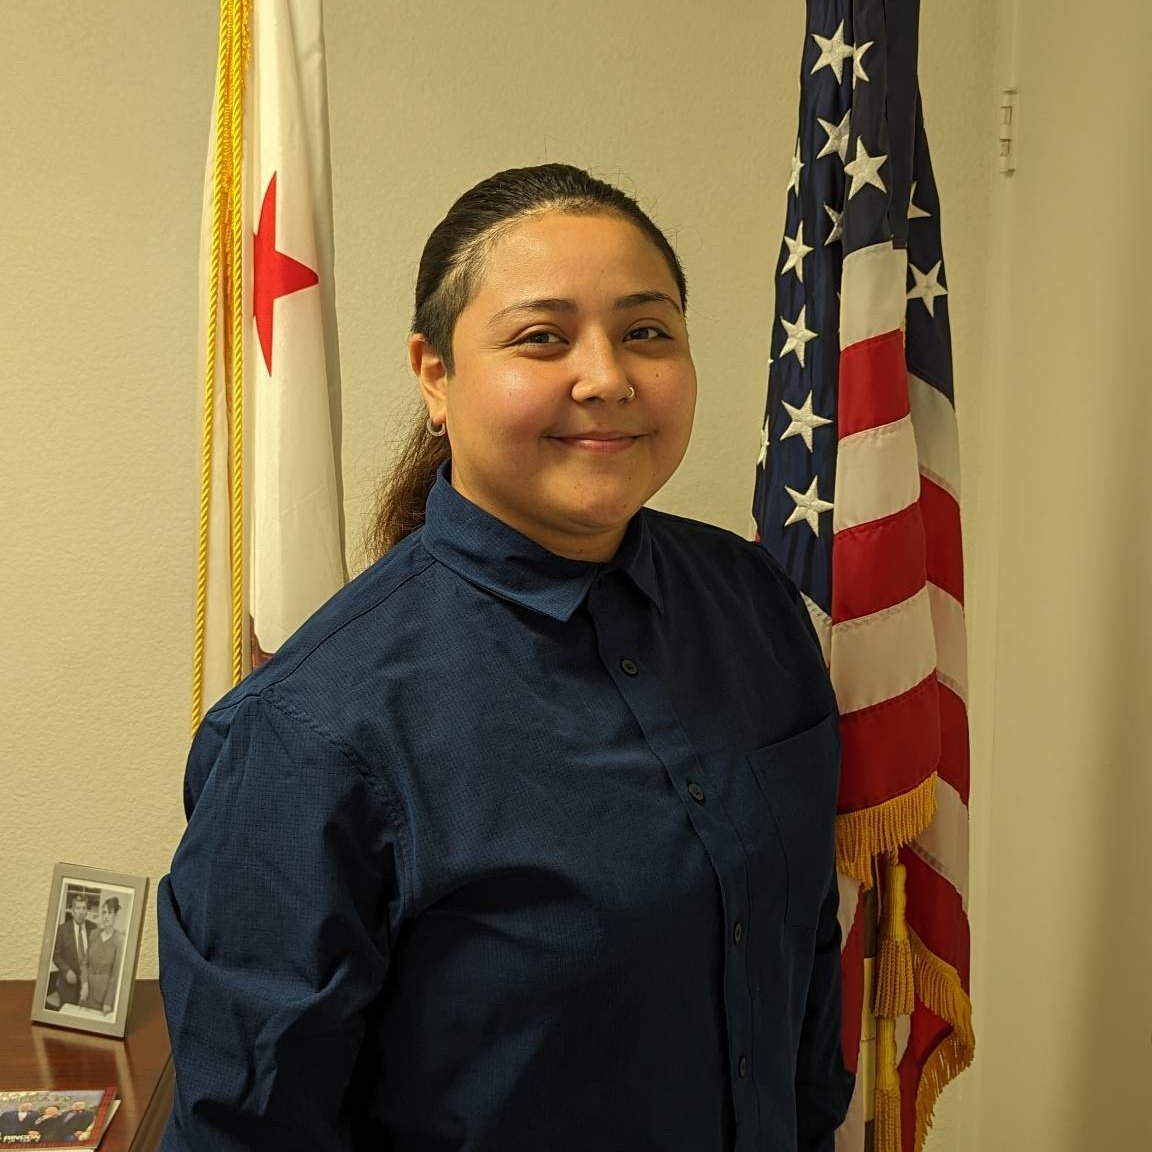 Our new intern started yesterday, Ms. Fatima Gonzalez-Ruiz. Ms. Gonzalez grew up in Spring Valley, CA together with her 5 brothers. She earned her BSc in Criminology and Justice at San Jose State, and wants to become a social worker. Ms. Gonzalez is excited to intern in #AD80.